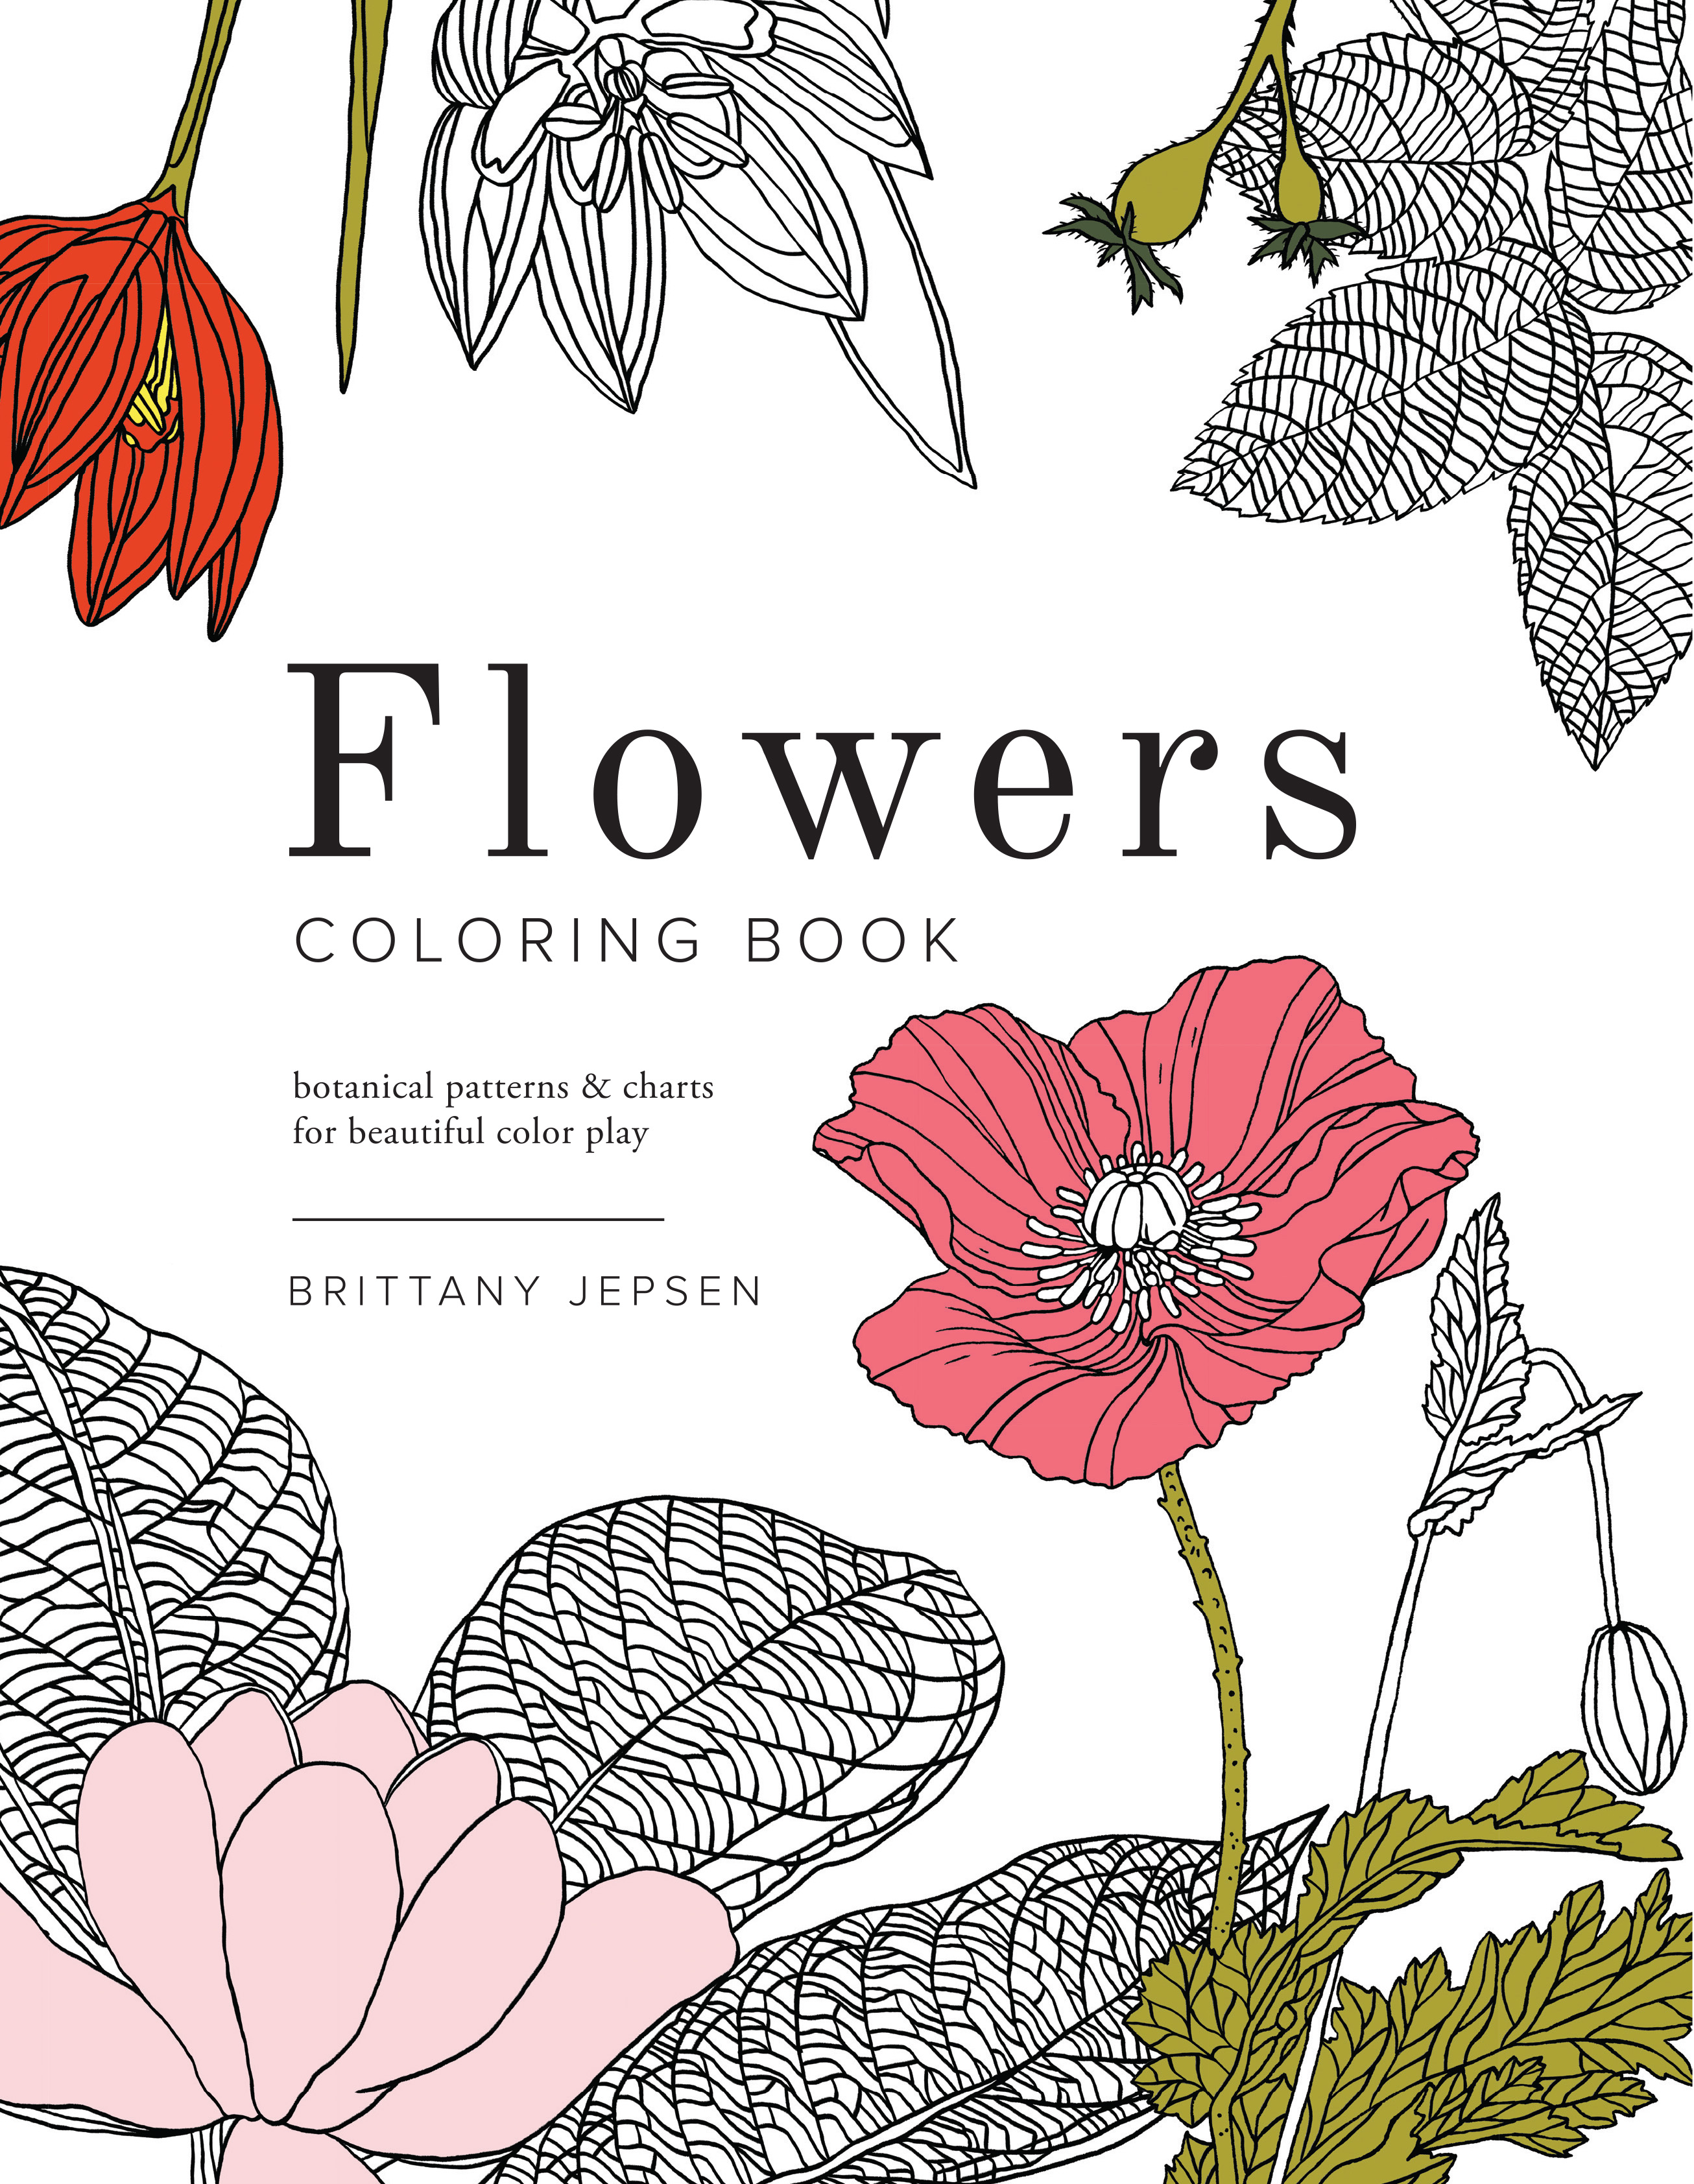 Flowers Coloring Book   The House That Lars Built